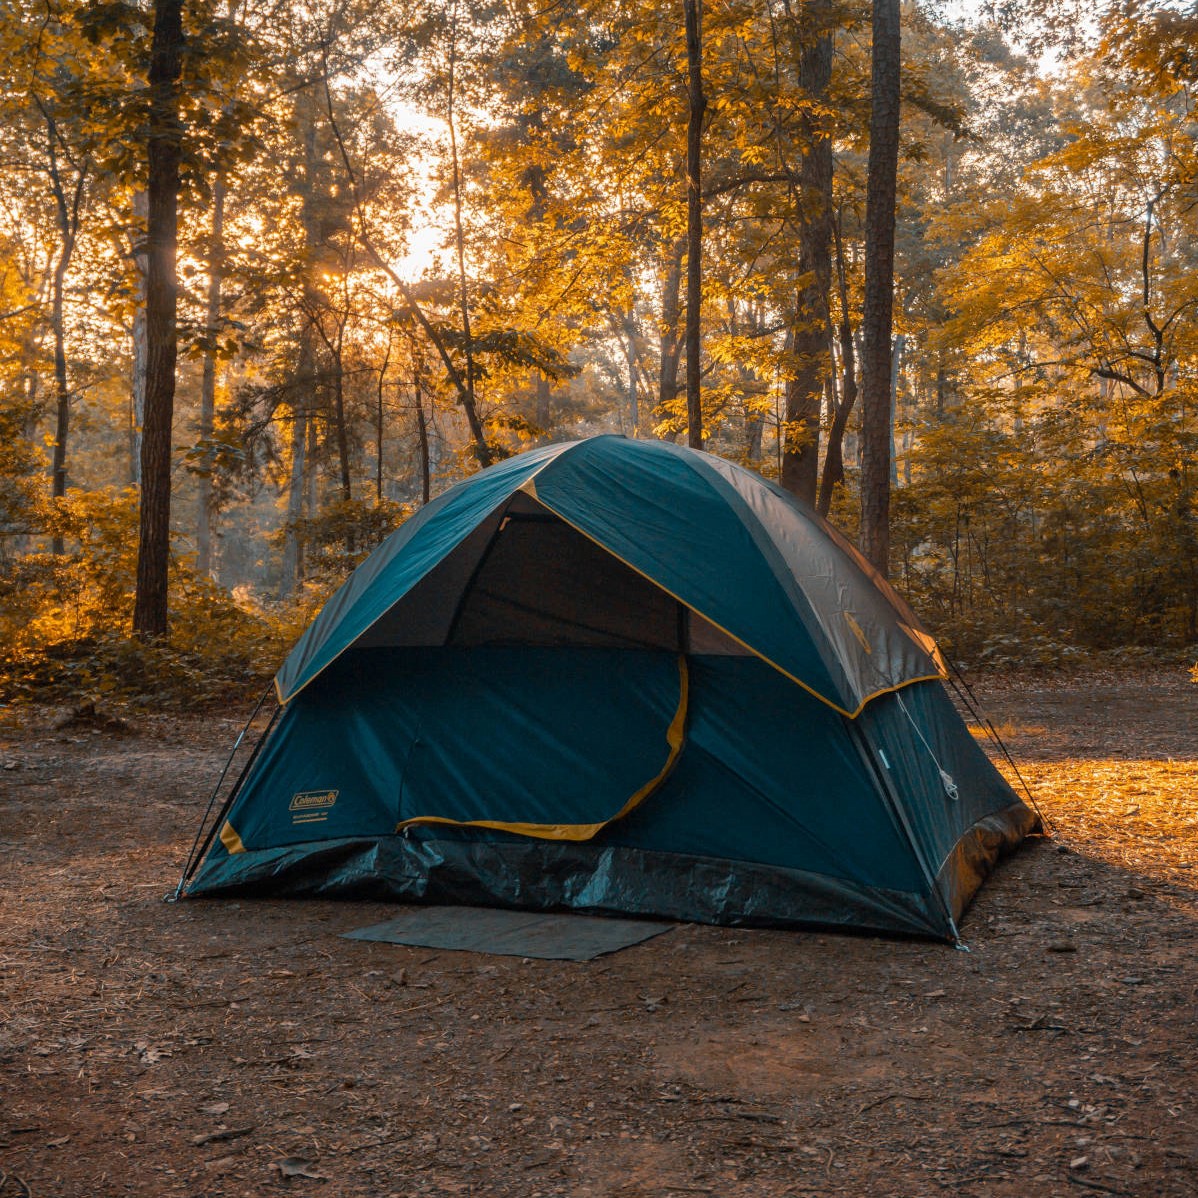 Tent camping in the woods during Fall - Hello Trail